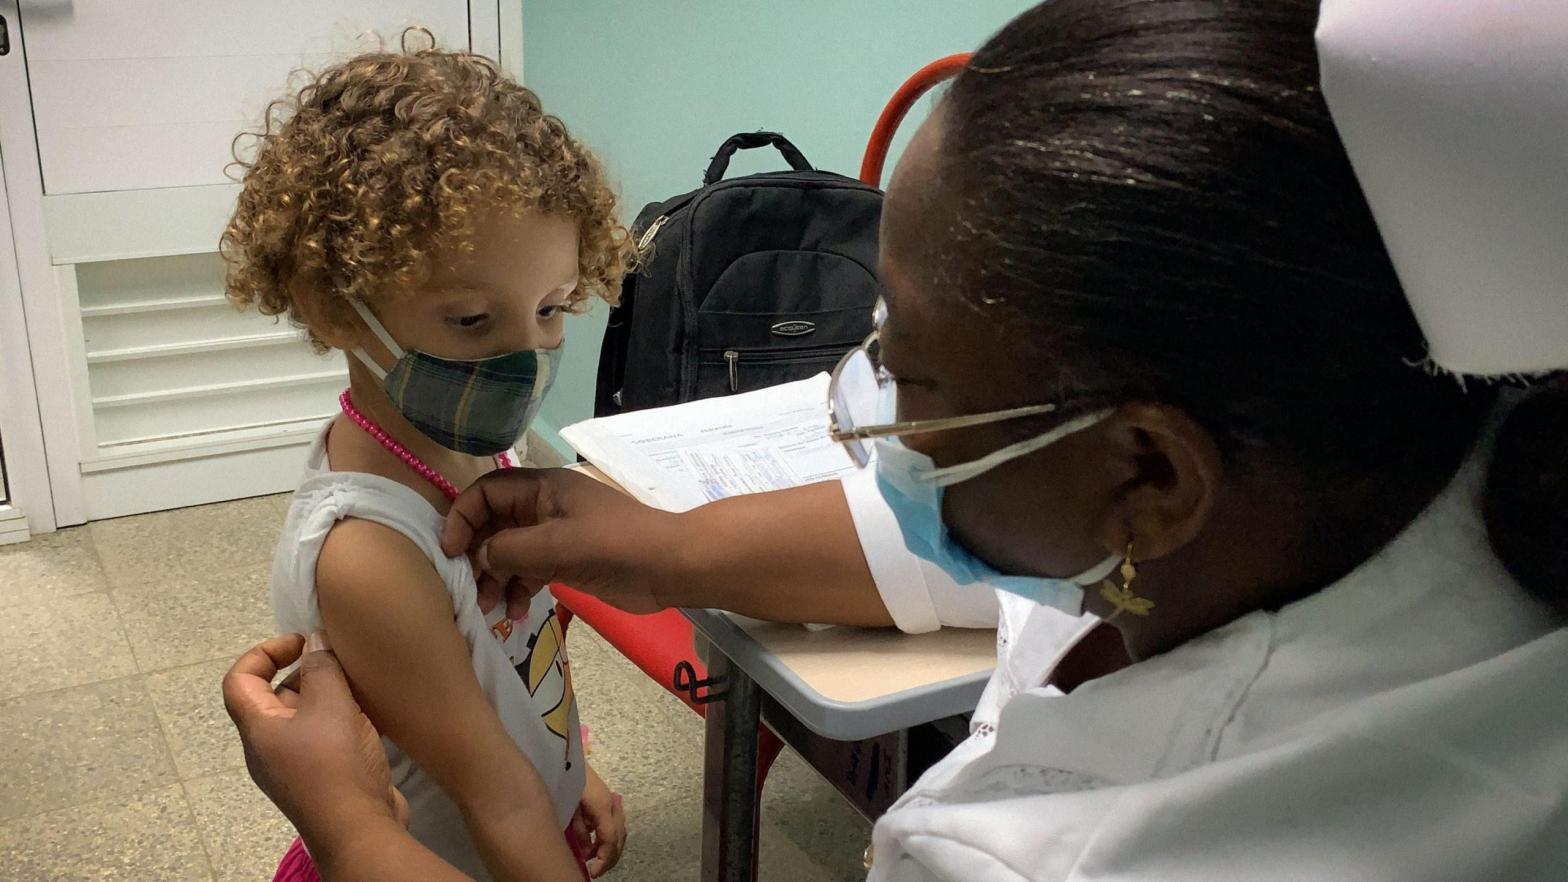 A nurse prepares Roxana Montano, 3, to receive her dose of Soberana Plus, a Cuban vaccine against covid-19, on August 24, 2021 at Juan Manuel Marquez hospital in Havana, as part of the vaccine study in children. (Photo: Adalberto Roque/AFP, Getty Images)